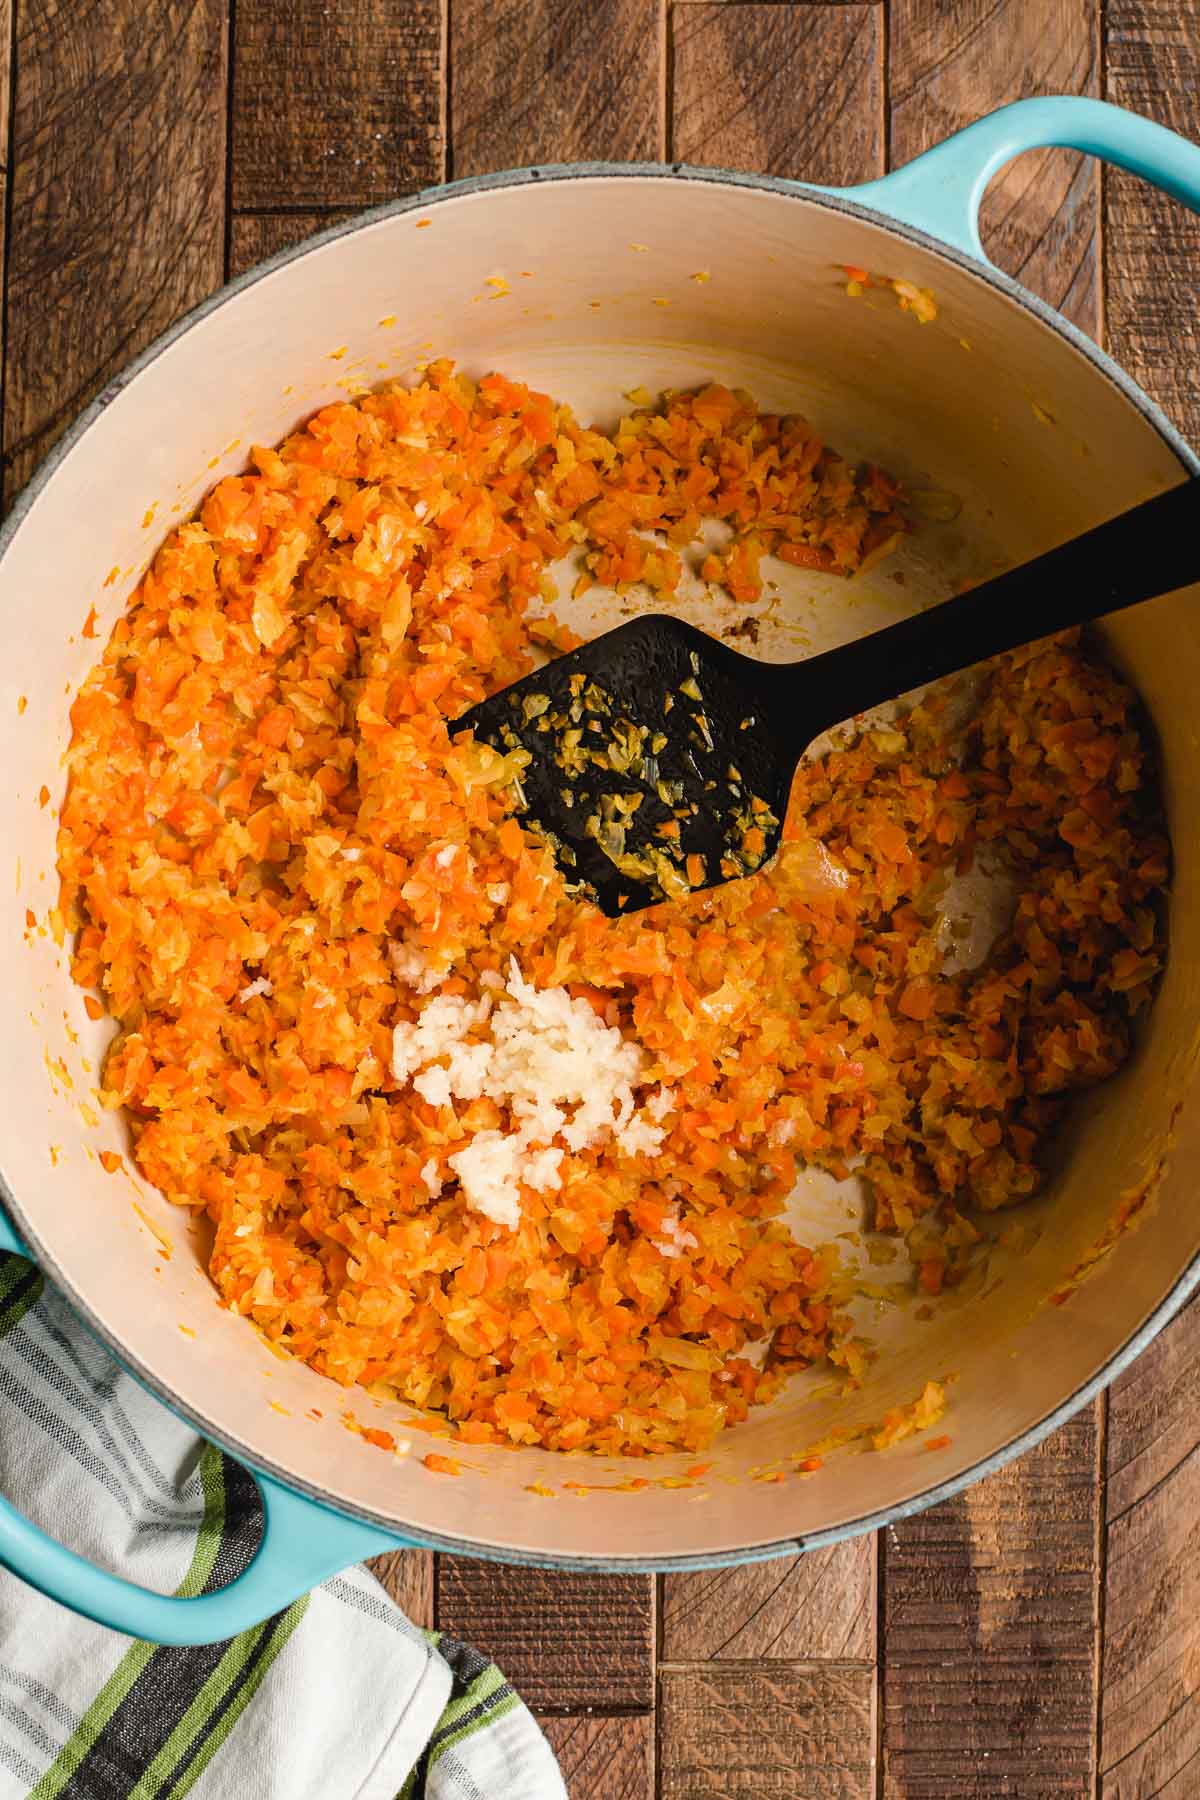 Fresh minced garlic shown on top of sauteed carrots and onions in a skillet.